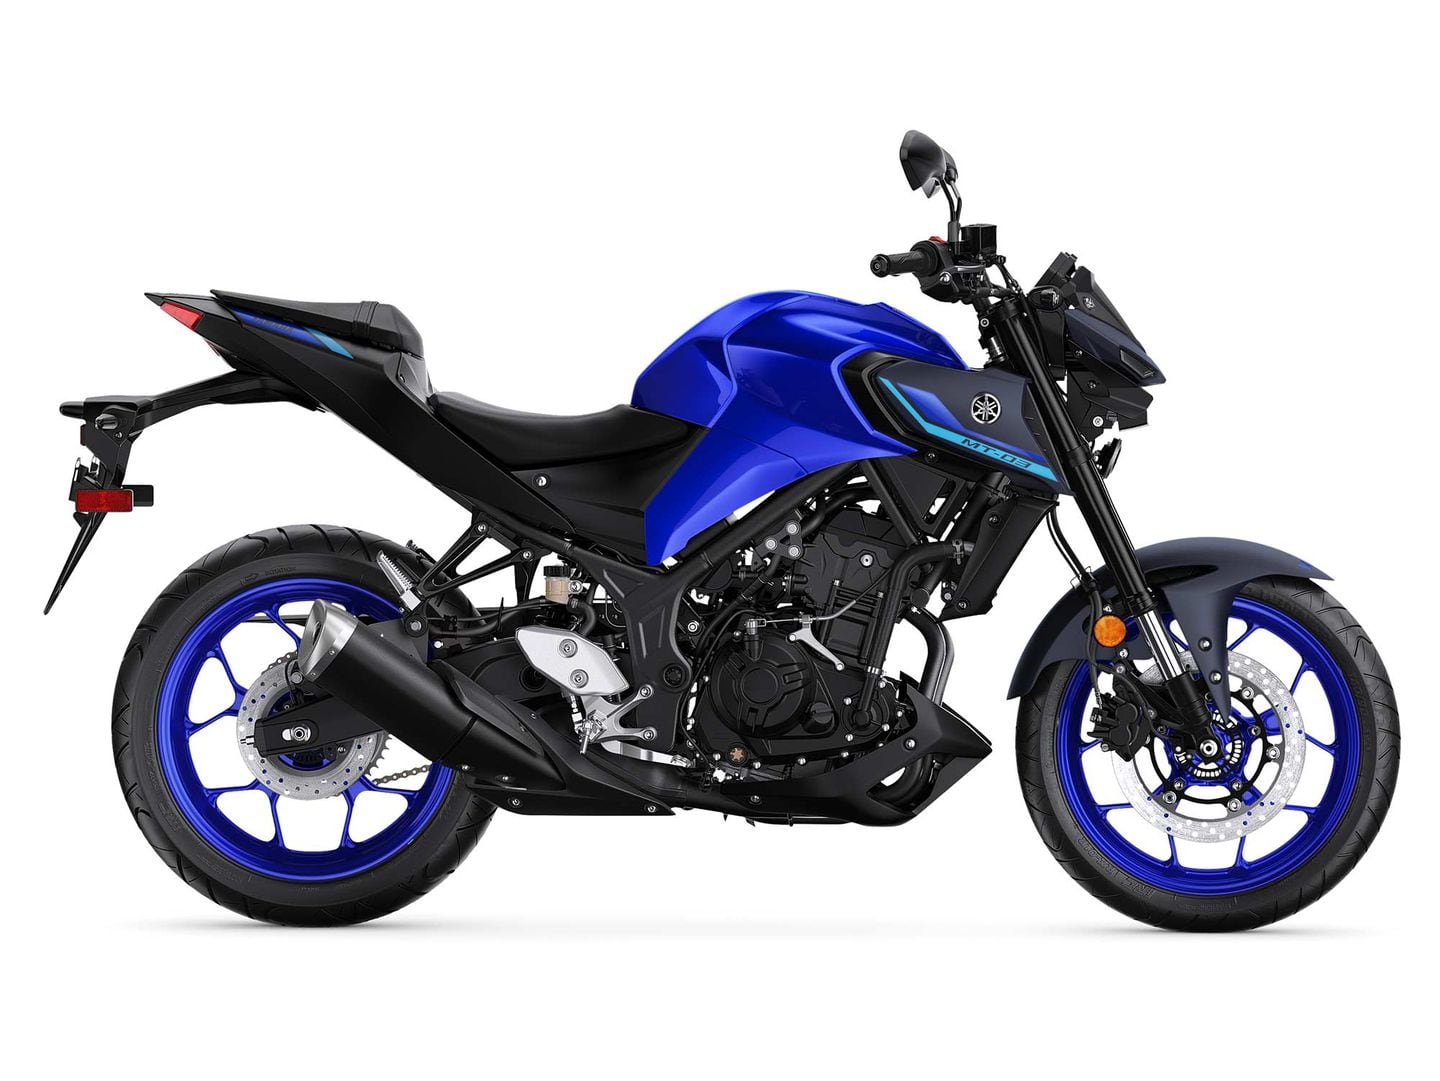 2022 Yamaha MT03 Buyer's Guide Specs, Photos, Price Cycle World